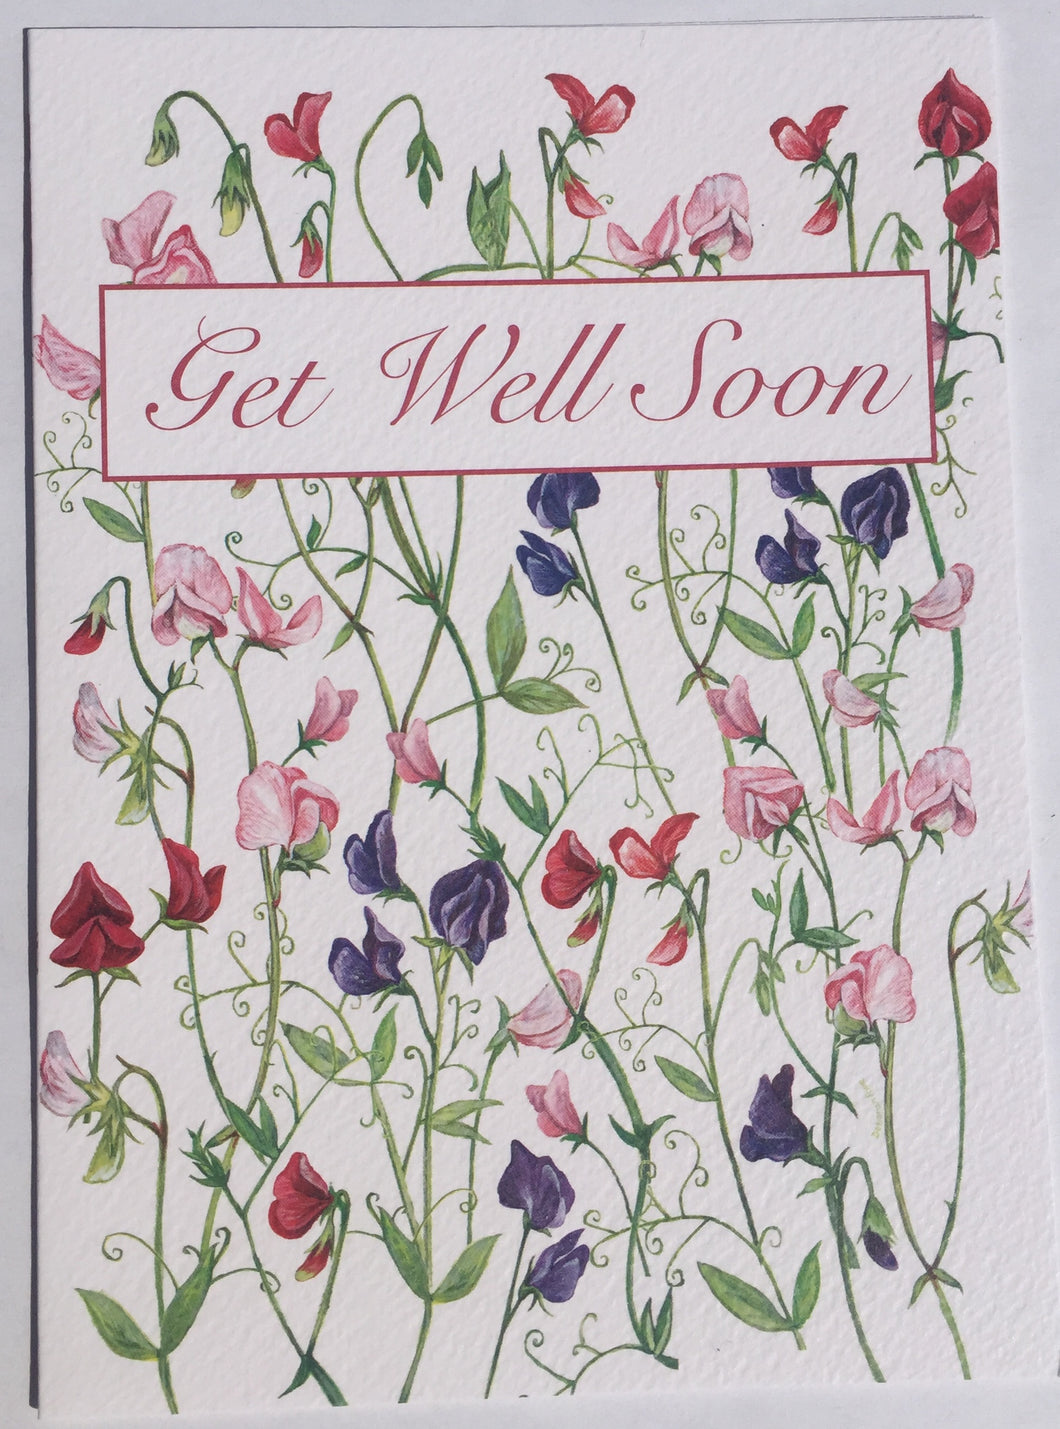 Get well soon - The Alresford Gift Shop